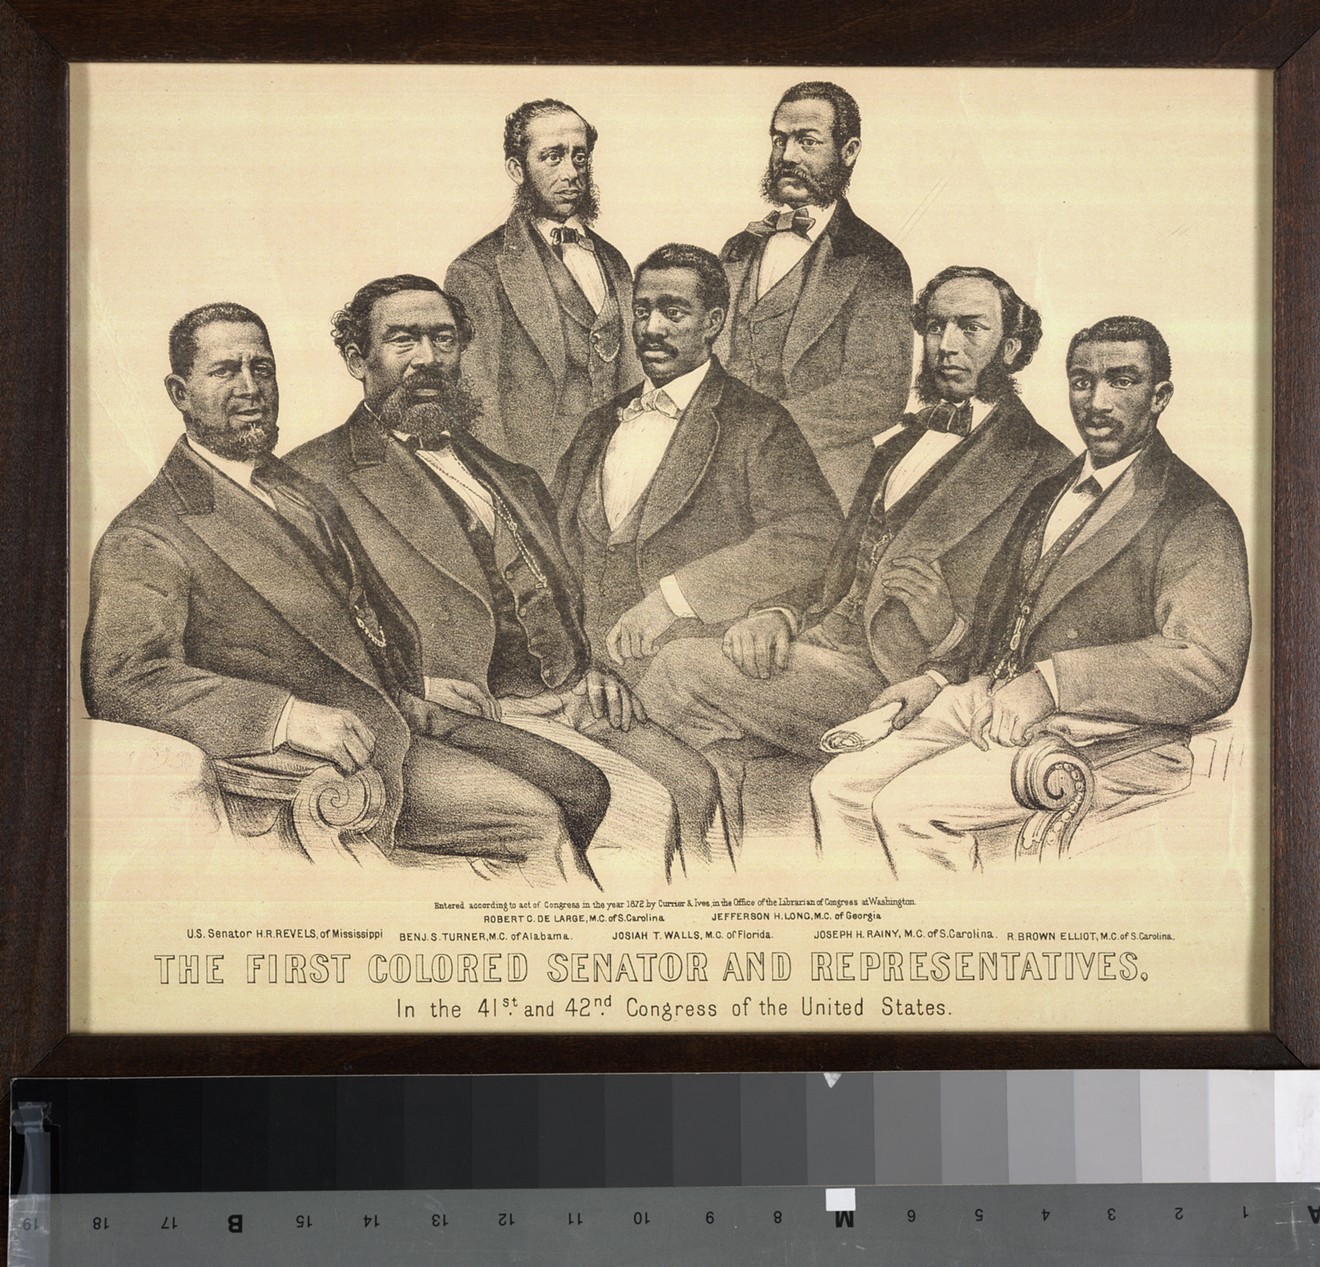 A portrait of the first African Americans in the U.S. Senate and House of Representatives is one of the artifacts on display at The Kinsey African American Art and History Collection, which runs until March 2020.